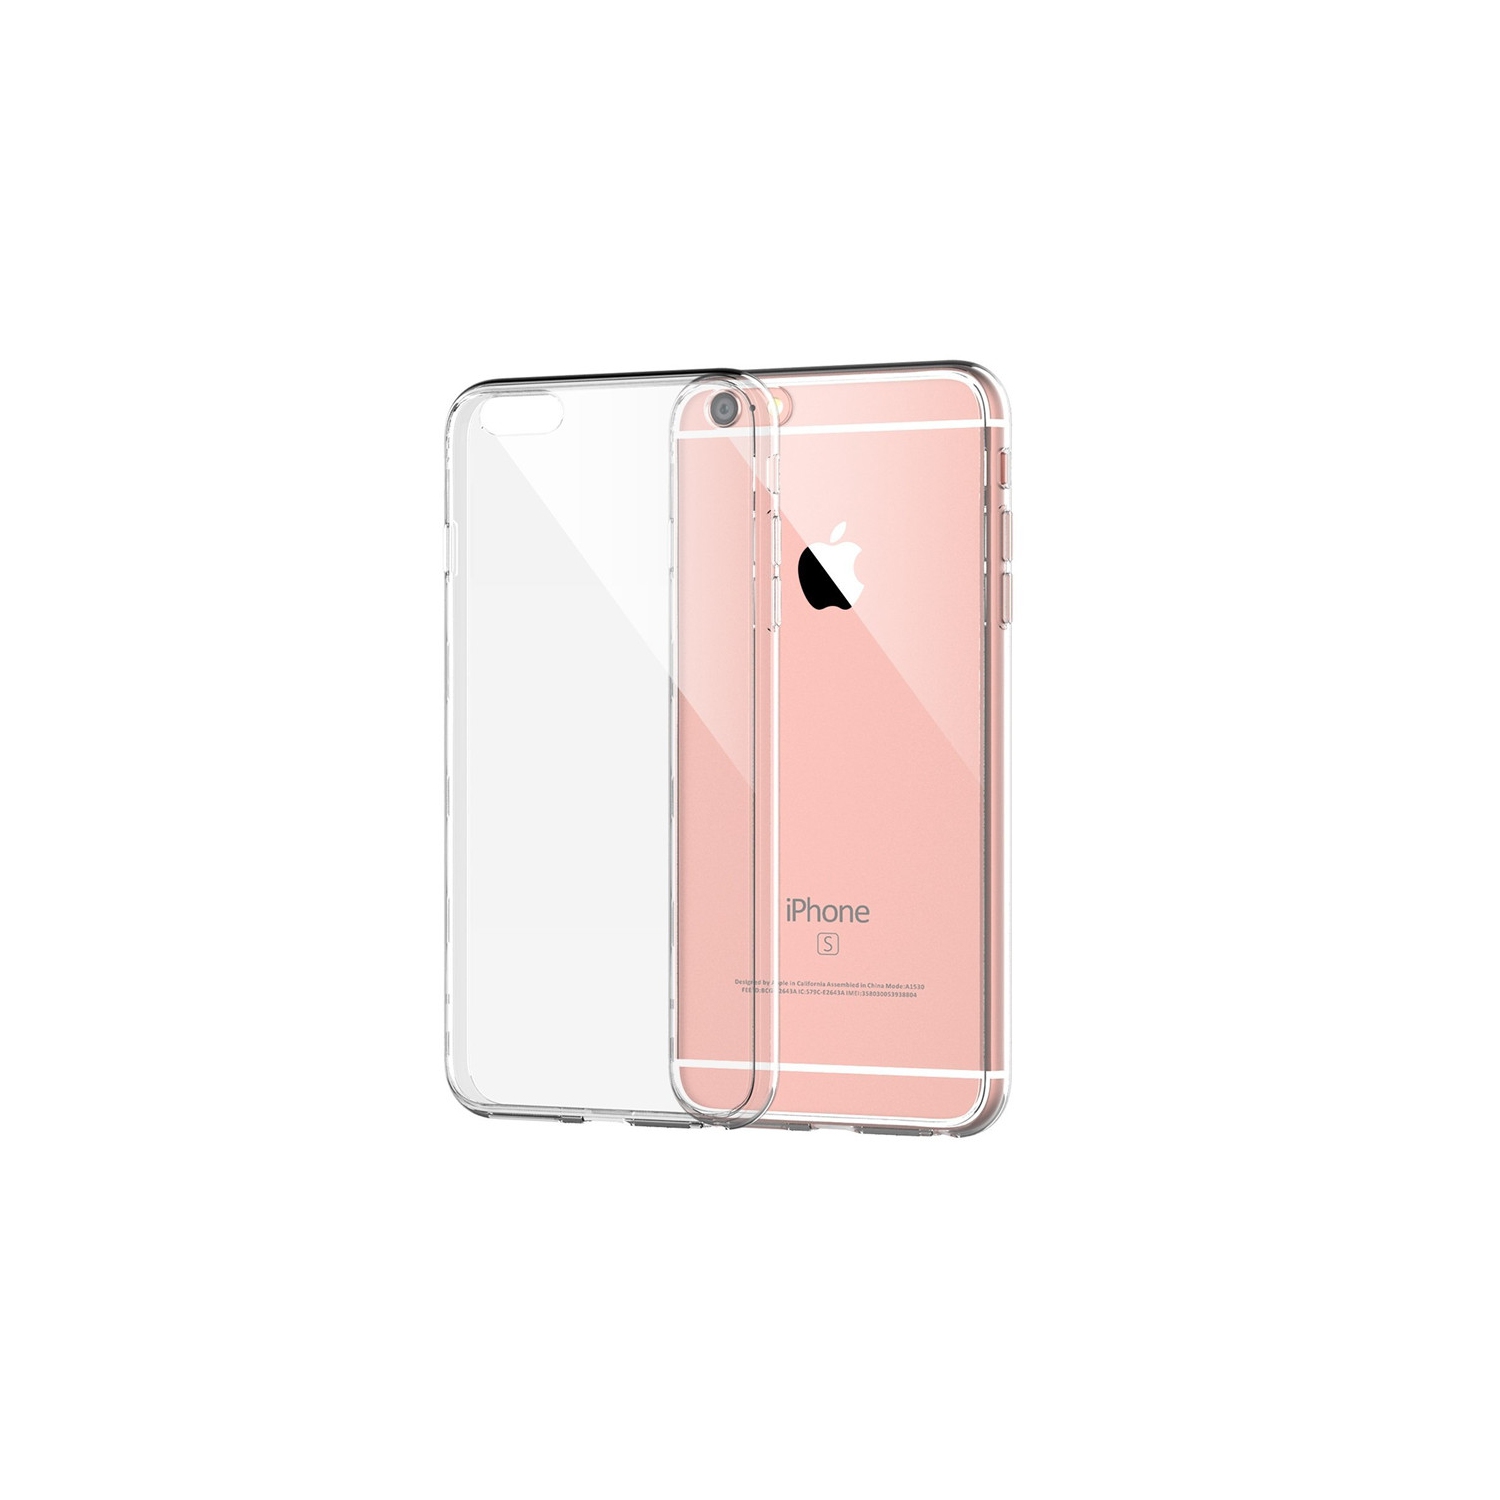 【CSmart】 Ultra Thin Soft TPU Silicone Jelly Bumper Back Cover Case for iPhone 6 & 6S (4.7"), Transparent Clear